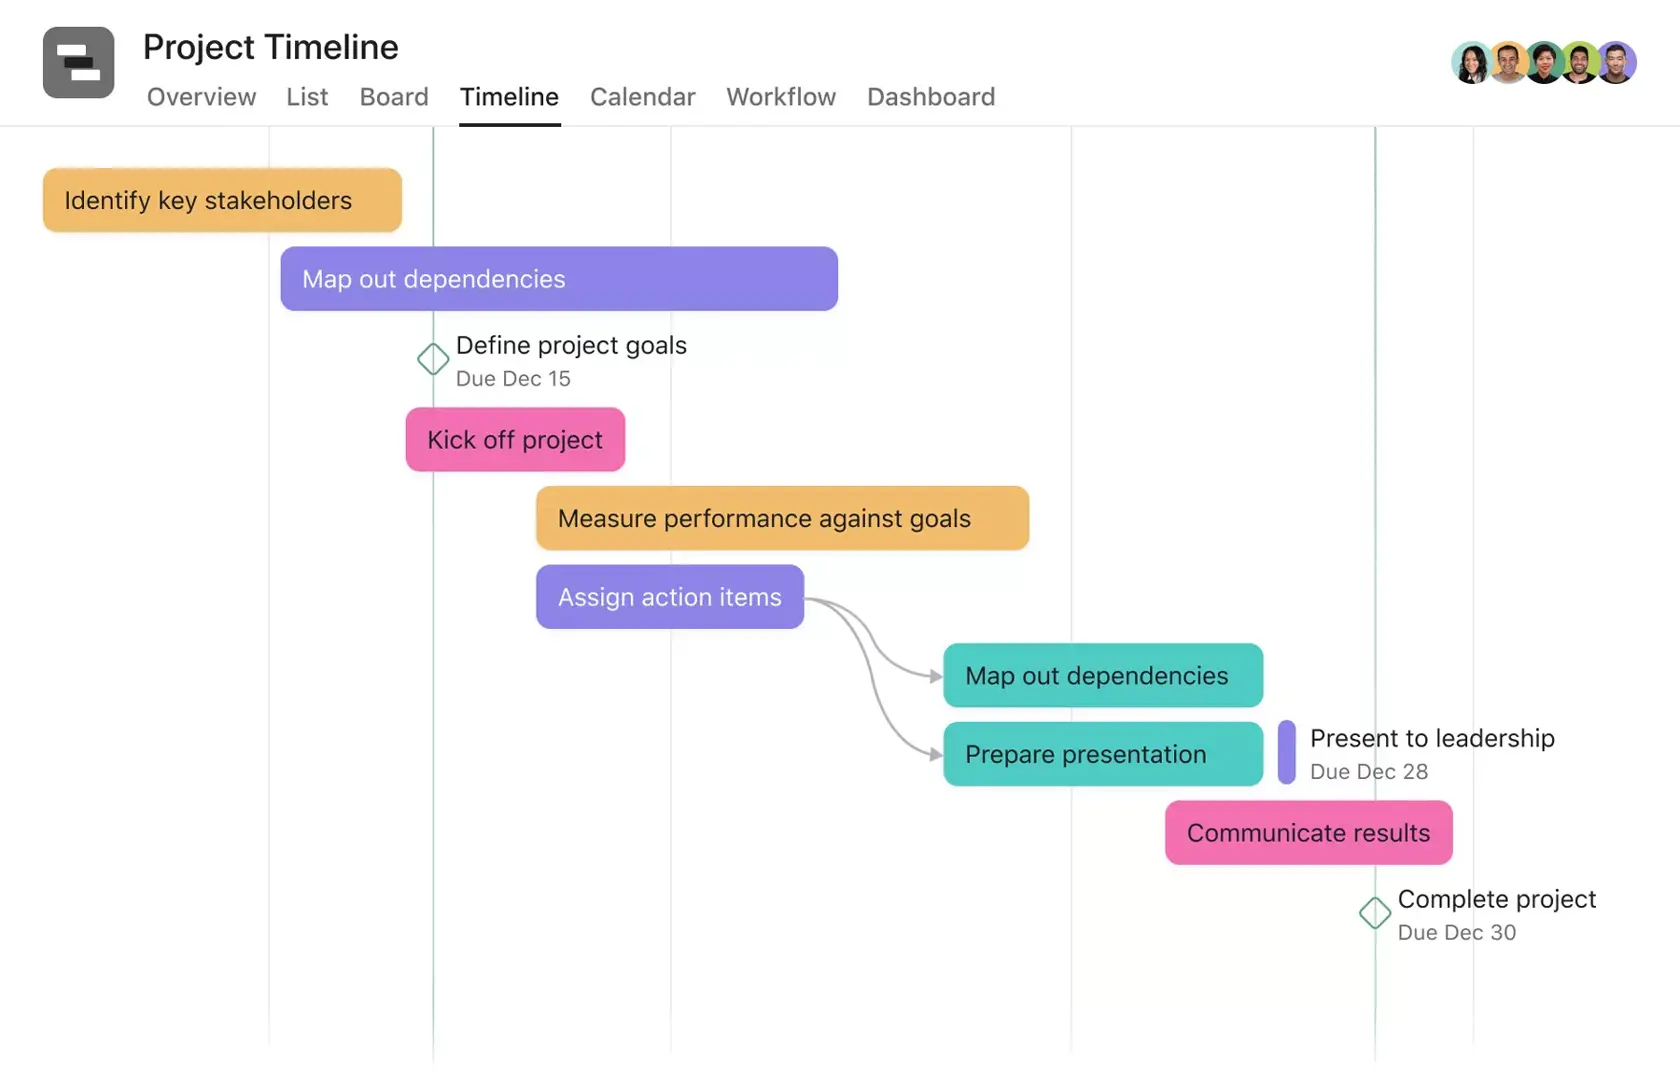 [Product ui] Gantt chart project, organized timeline view in Asana with dependencies and due dates (Timeline)